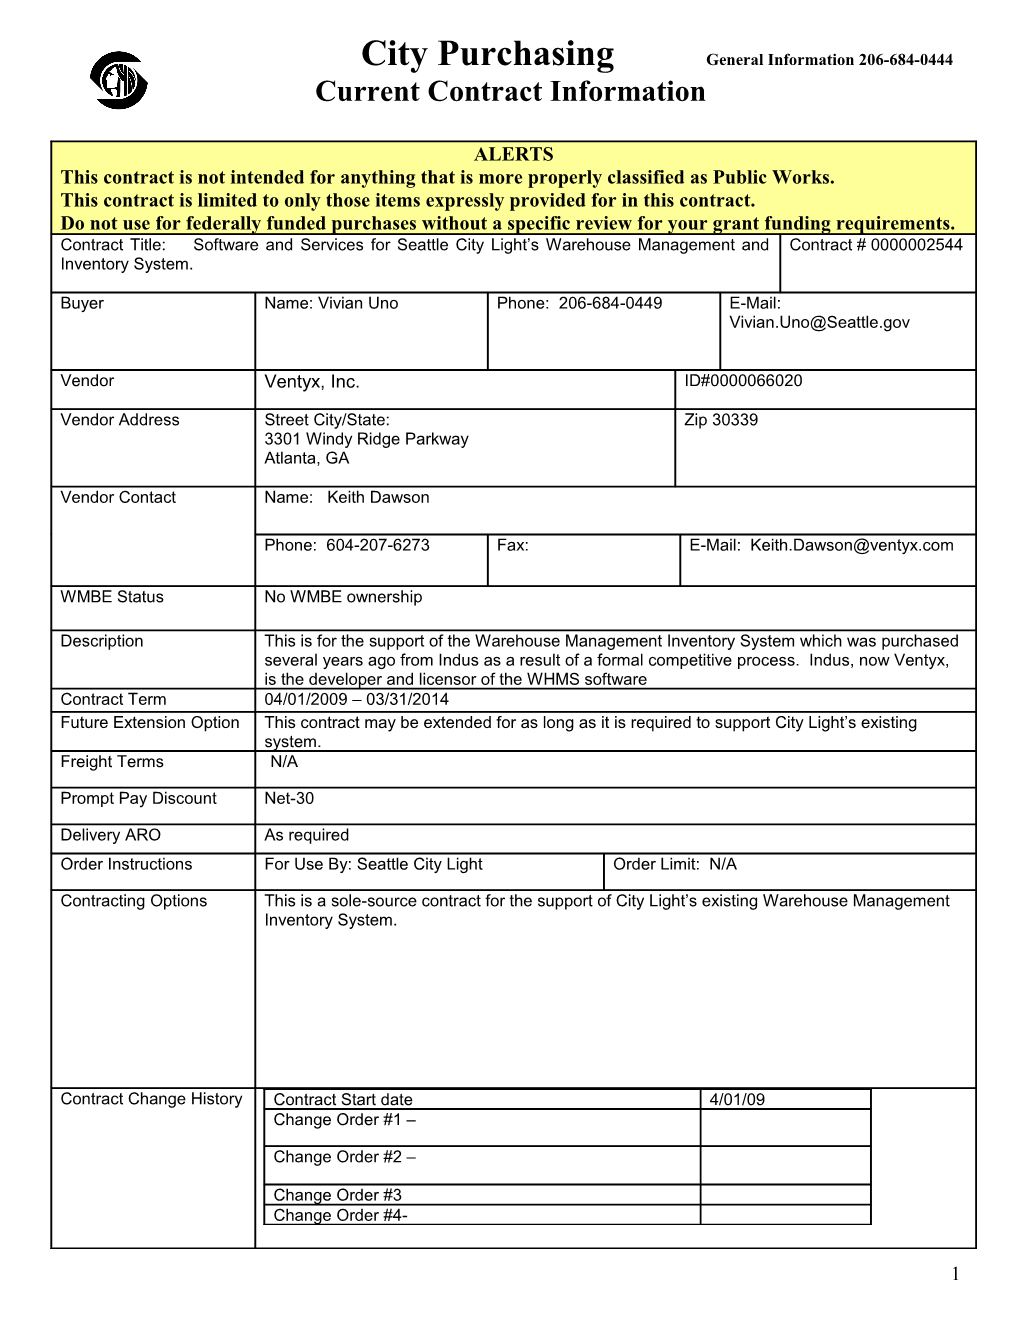 Current Contract Information Form s28